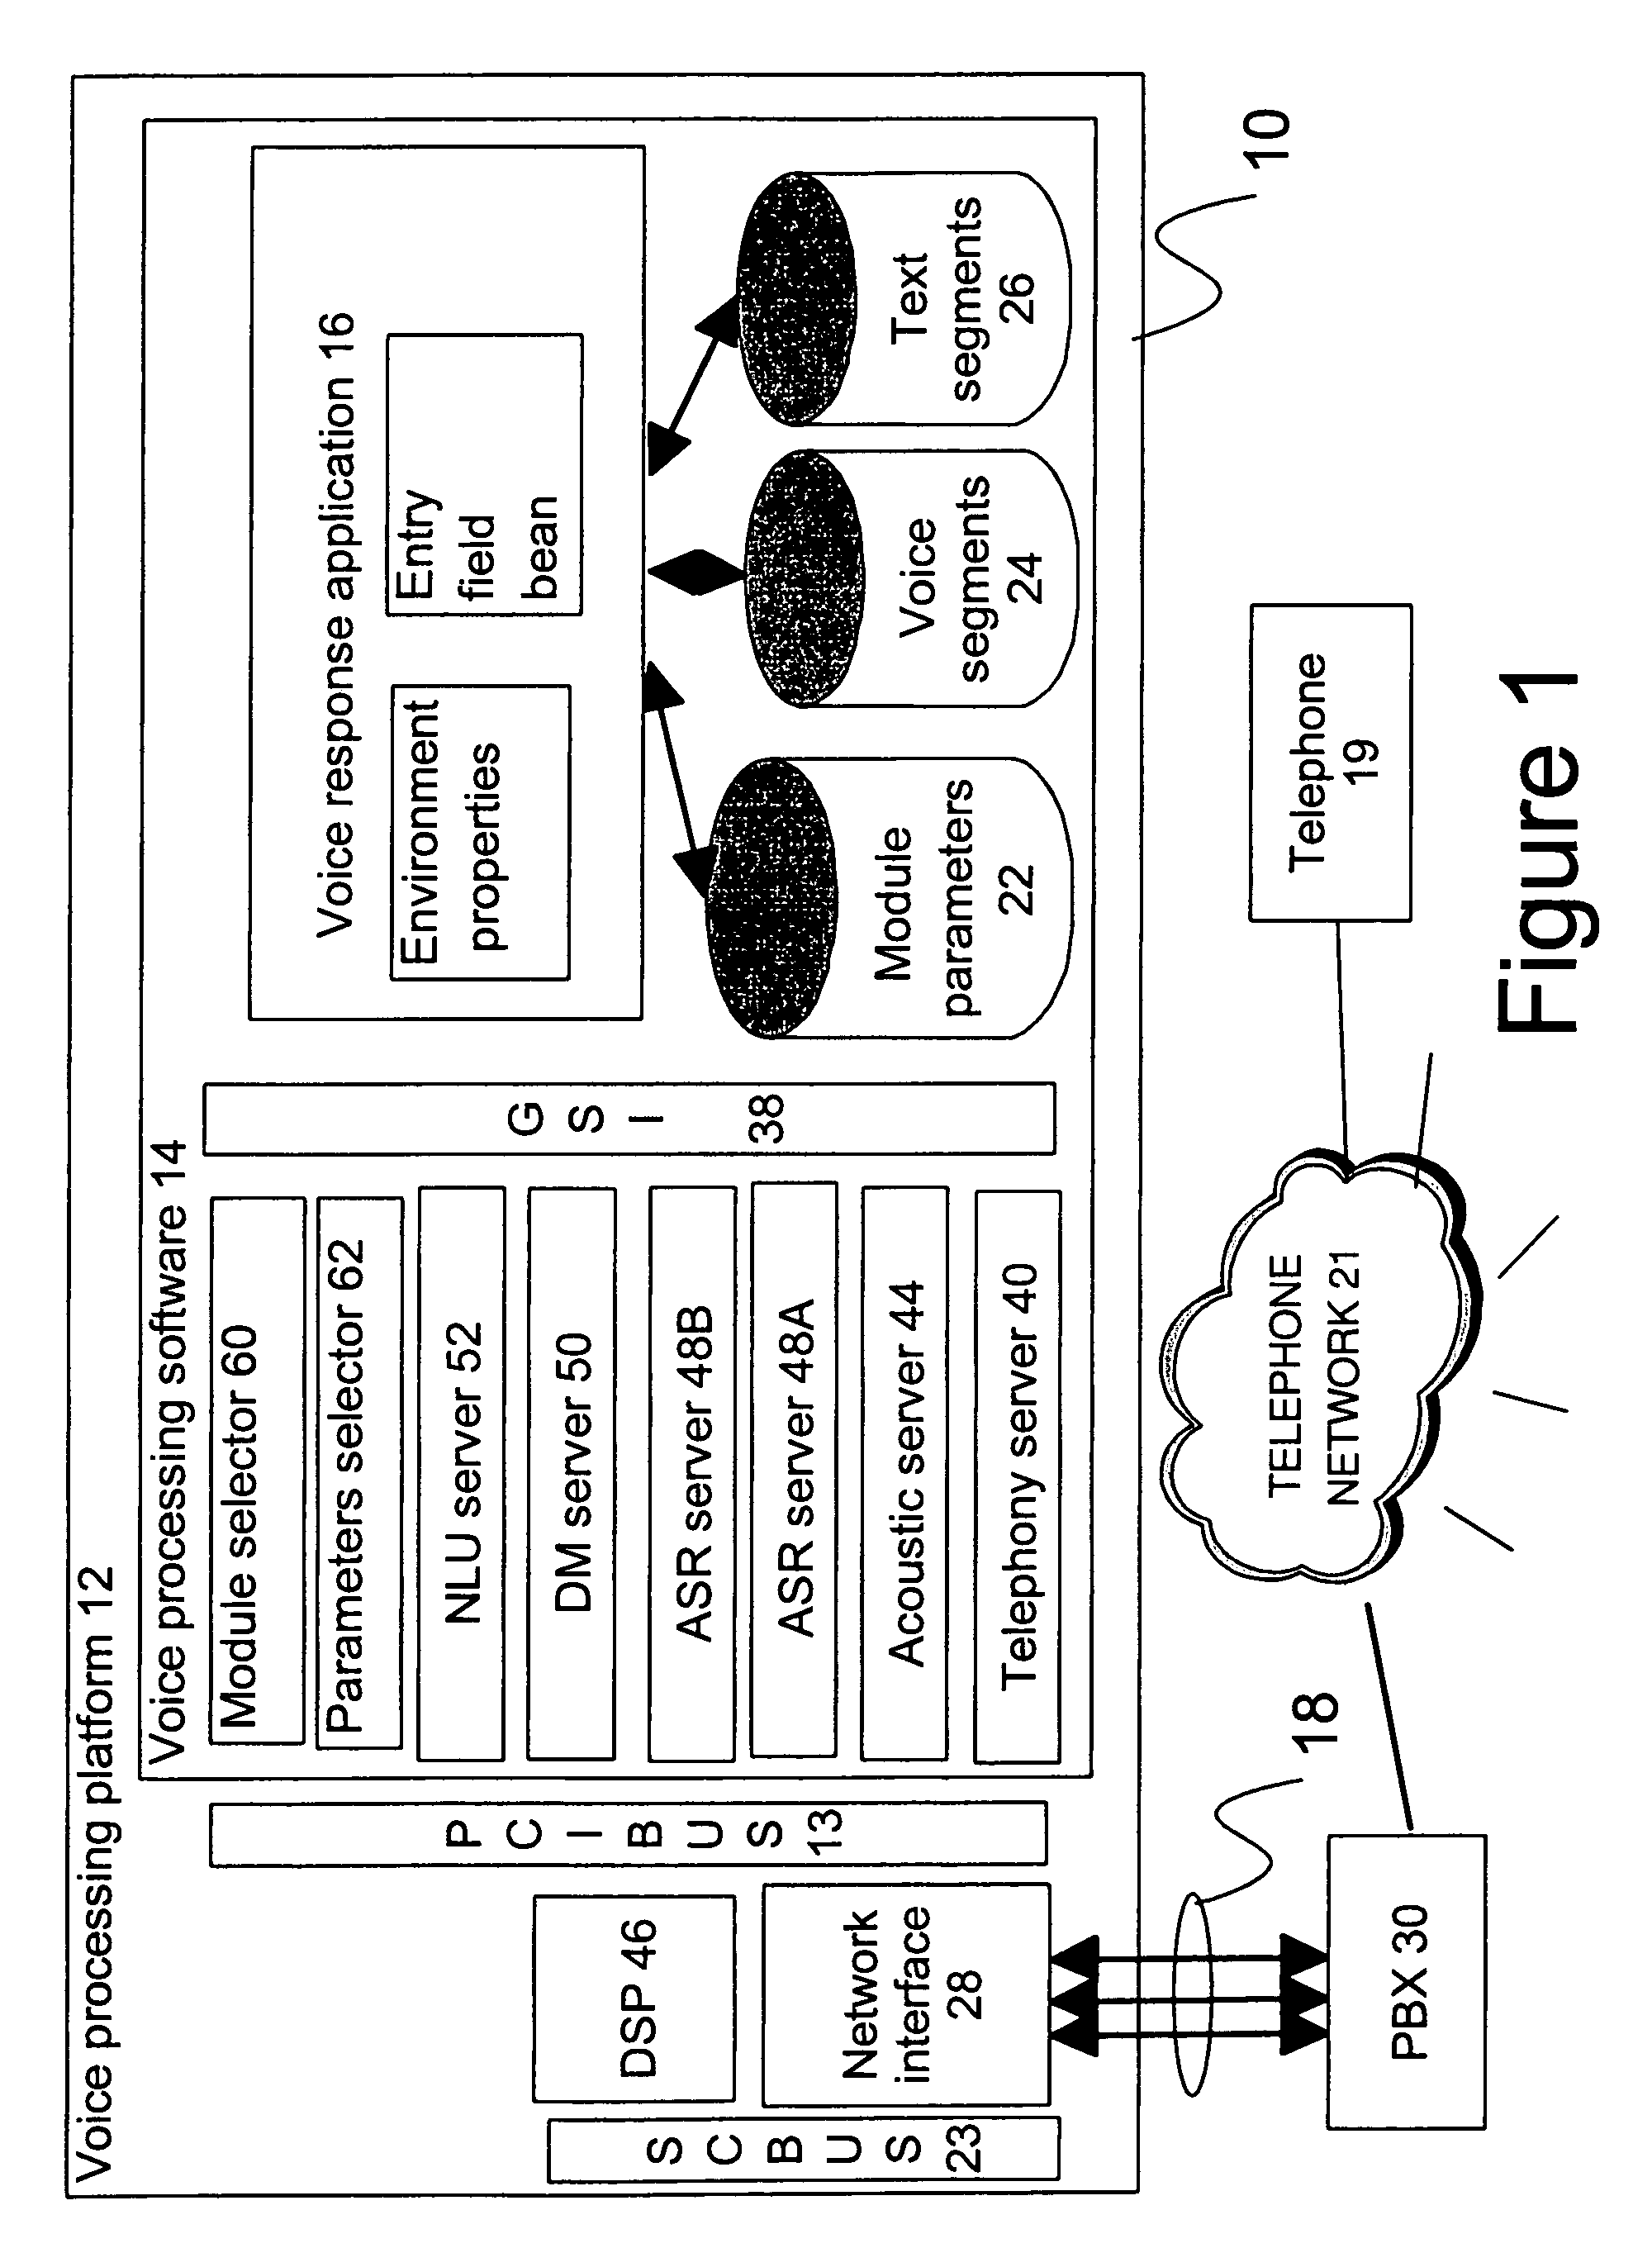 Management of speech technology modules in an interactive voice response system